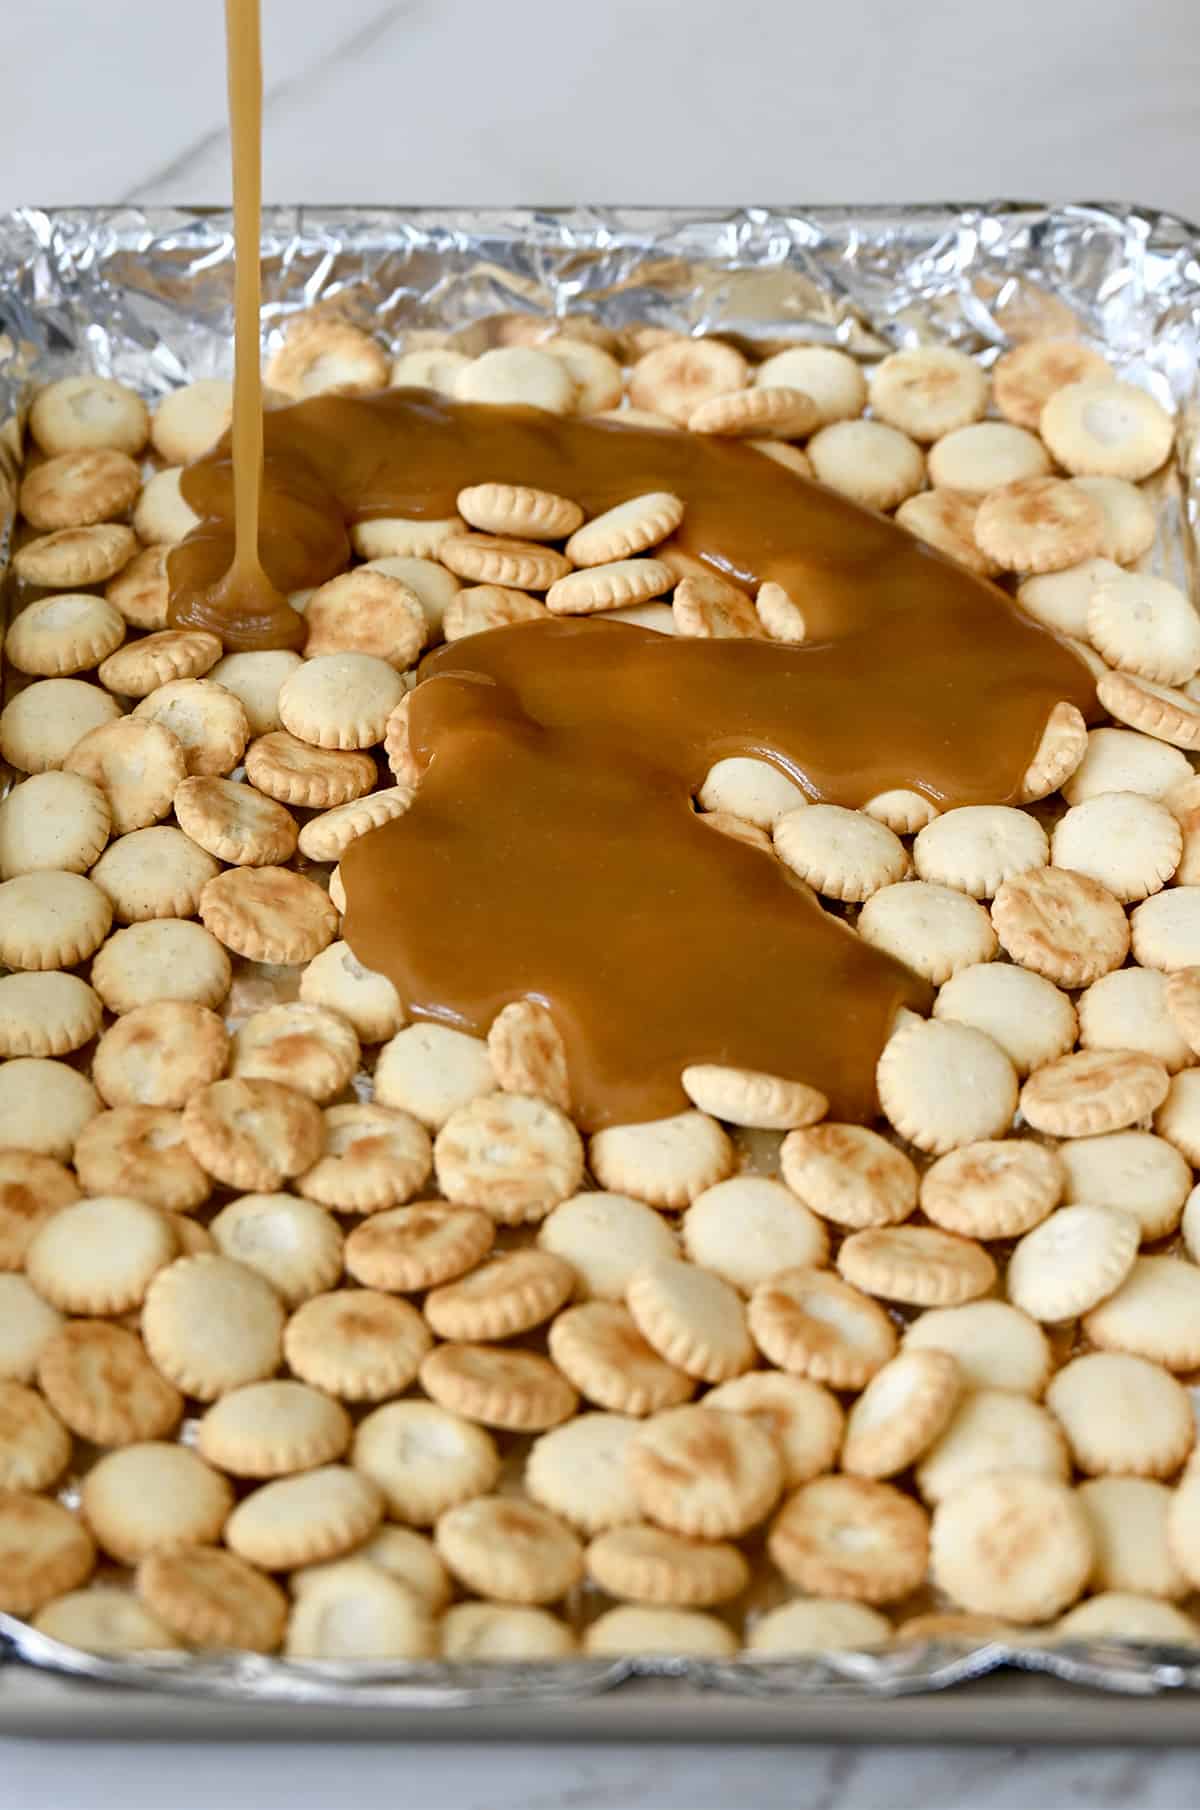 Toffee sauce being poured atop oyster crackers on a foil-lined baking sheet.